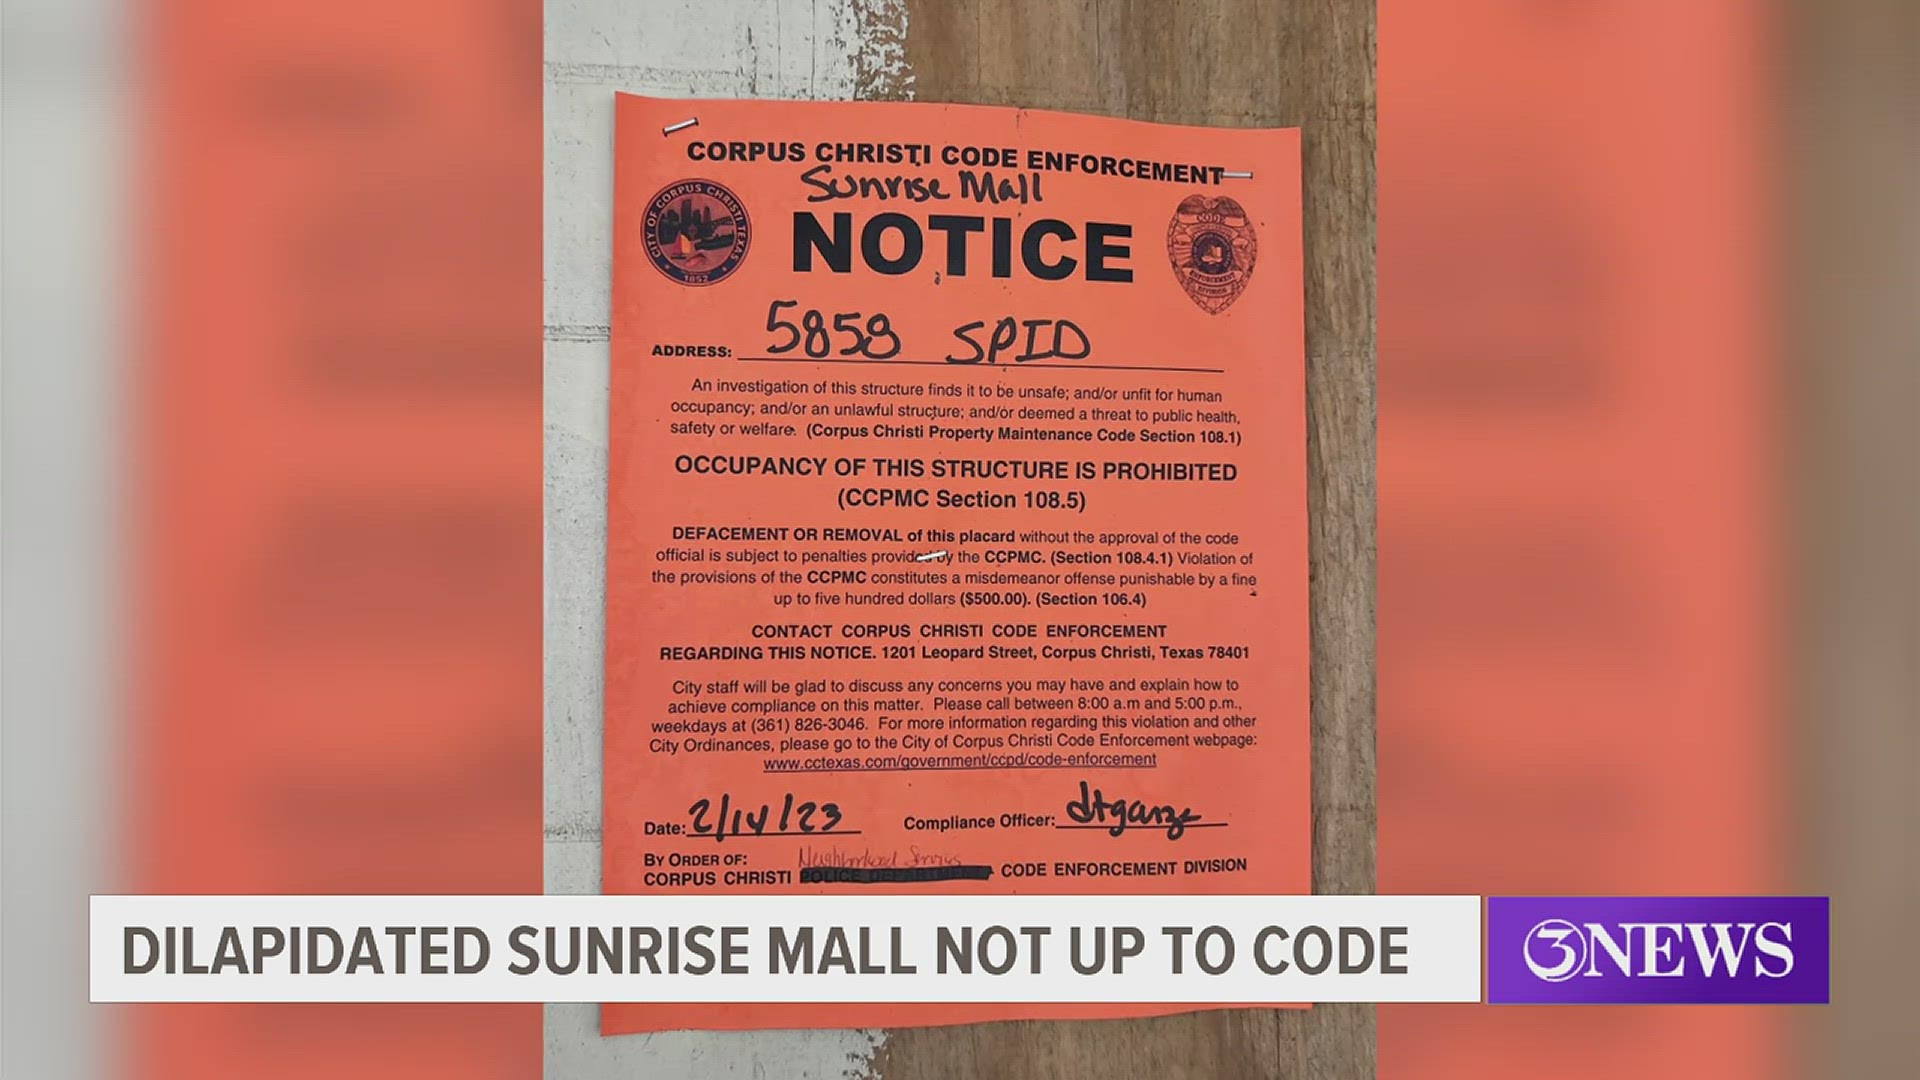 Corpus Christi Code Enforcement placed signs on the doors on February 14 and again on May 2 prohibiting entrance to the building due to violations.